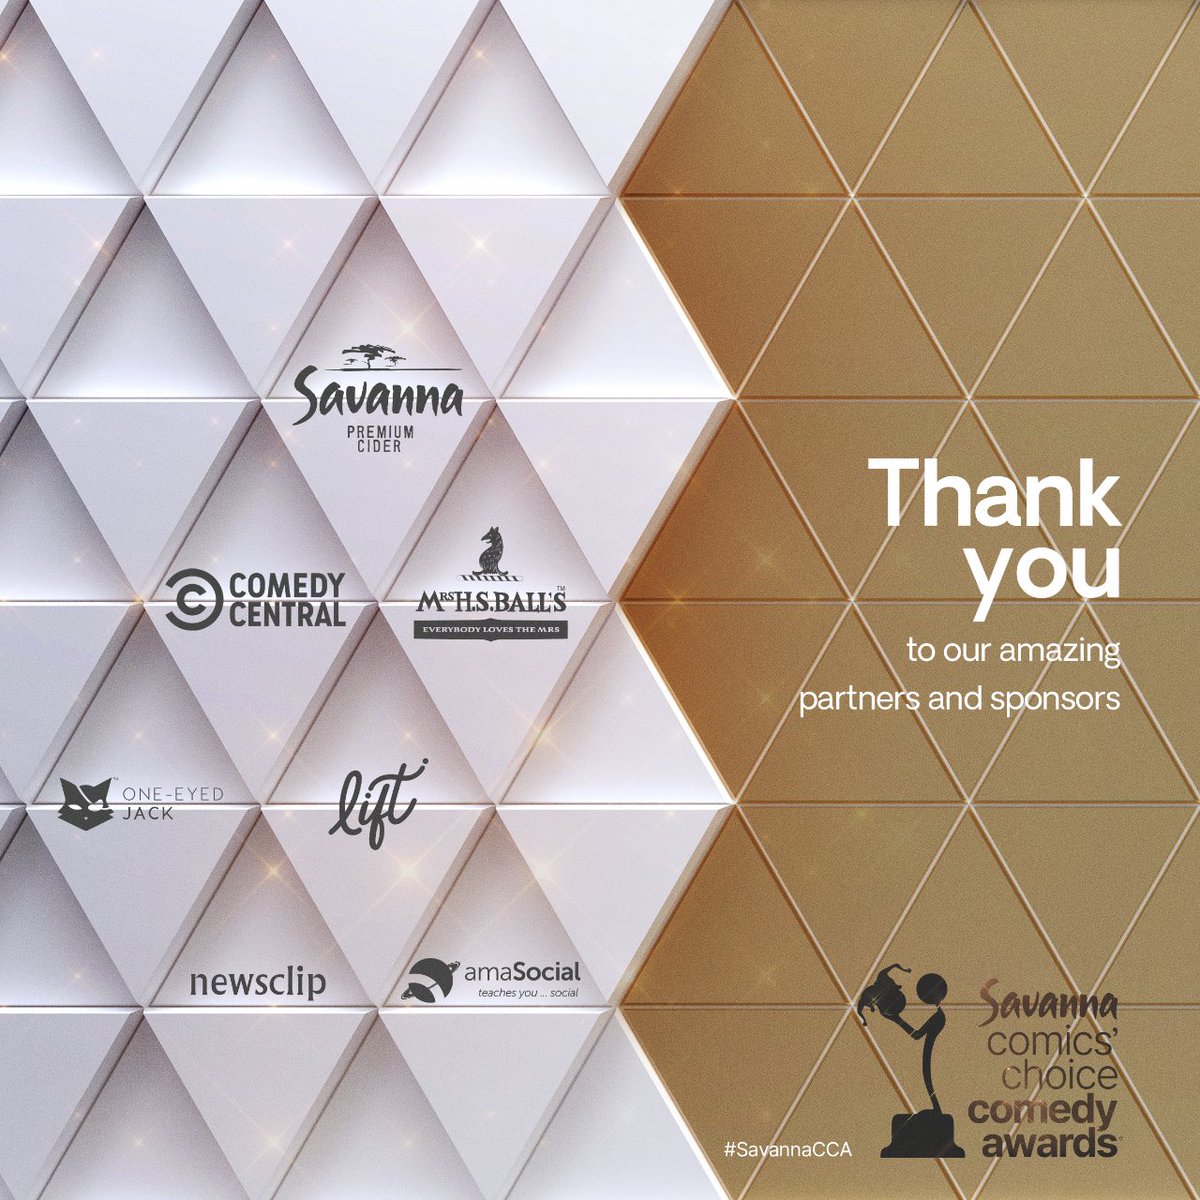 A big THANK YOU to our fantastic sponsors and partners! Your support lights up the comedy scene, bringing laughter to audiences everywhere. With you, we spotlight South African comedy talent and create unforgettable moments. Cheers to more laughter and partnership! #SavannaCCA